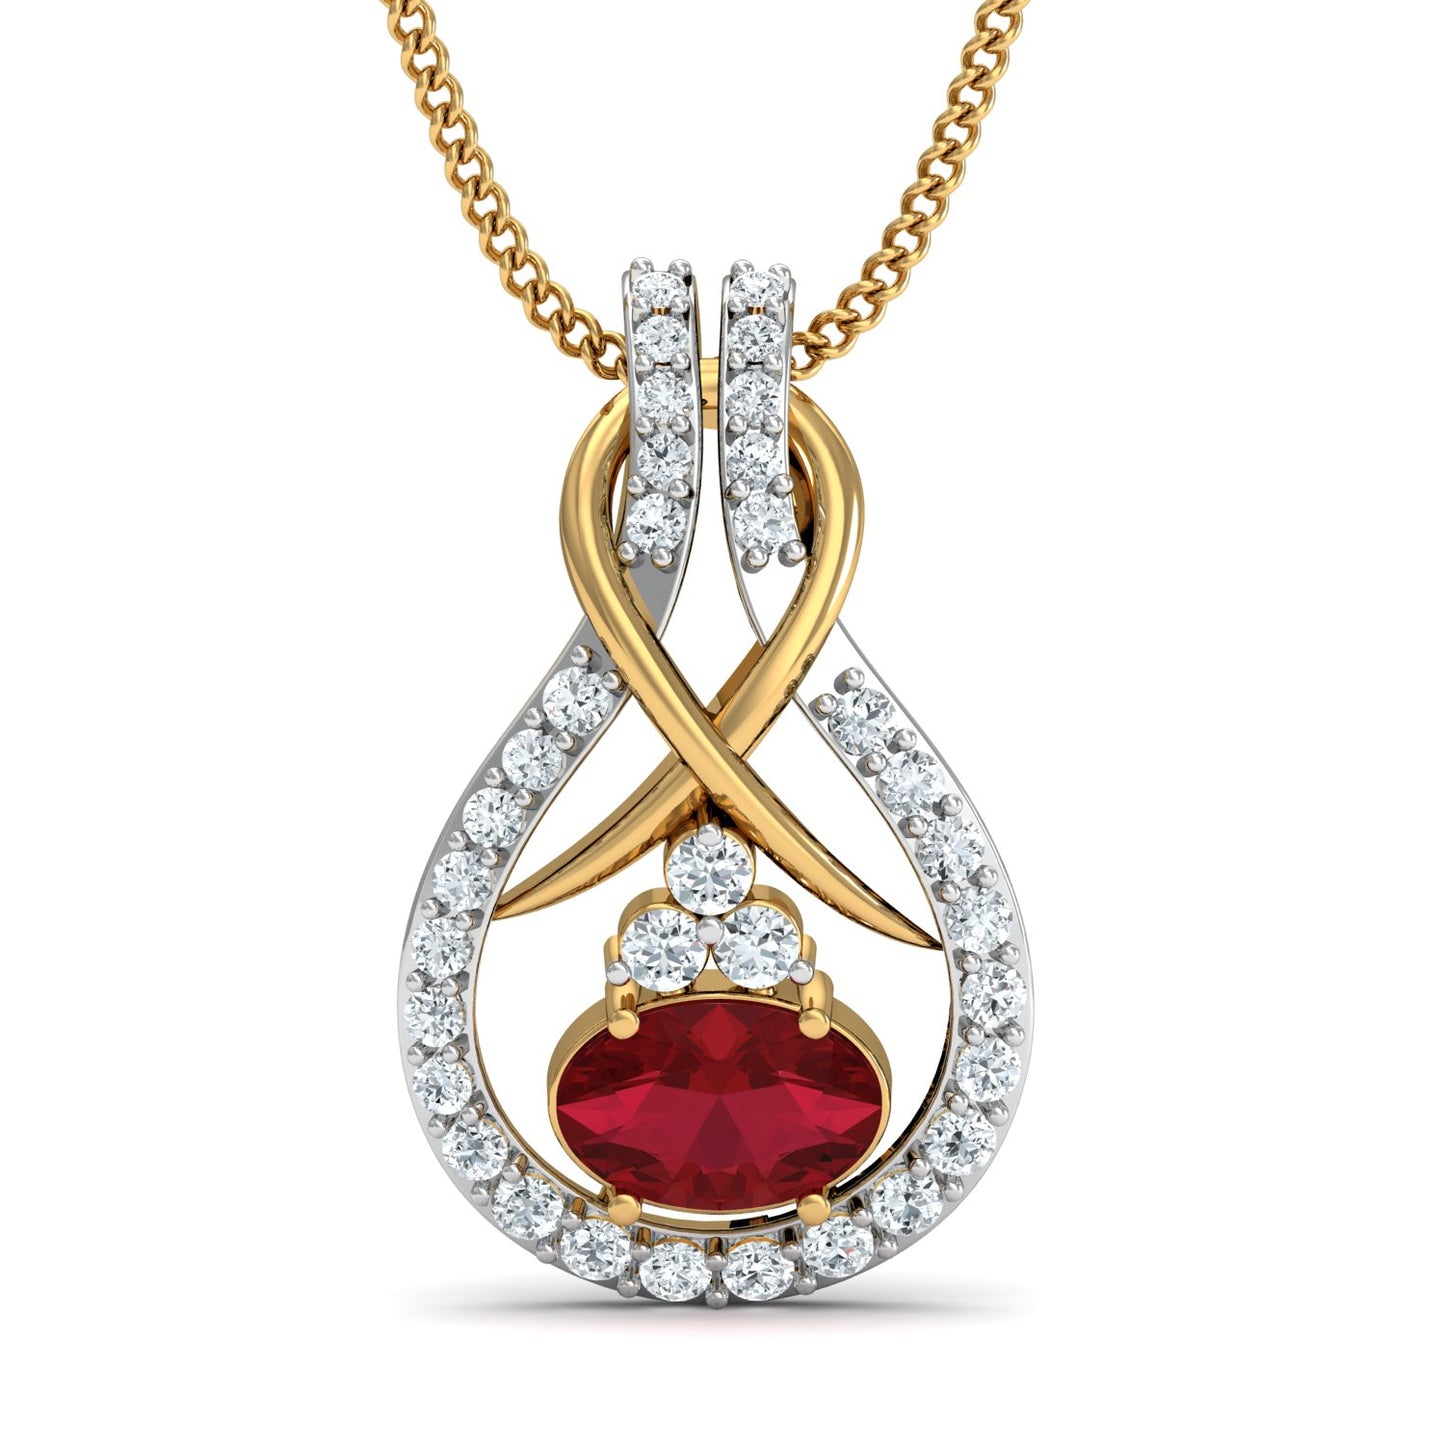 Diva maroon pendant (Gold Plated 925 Sterling Silver)